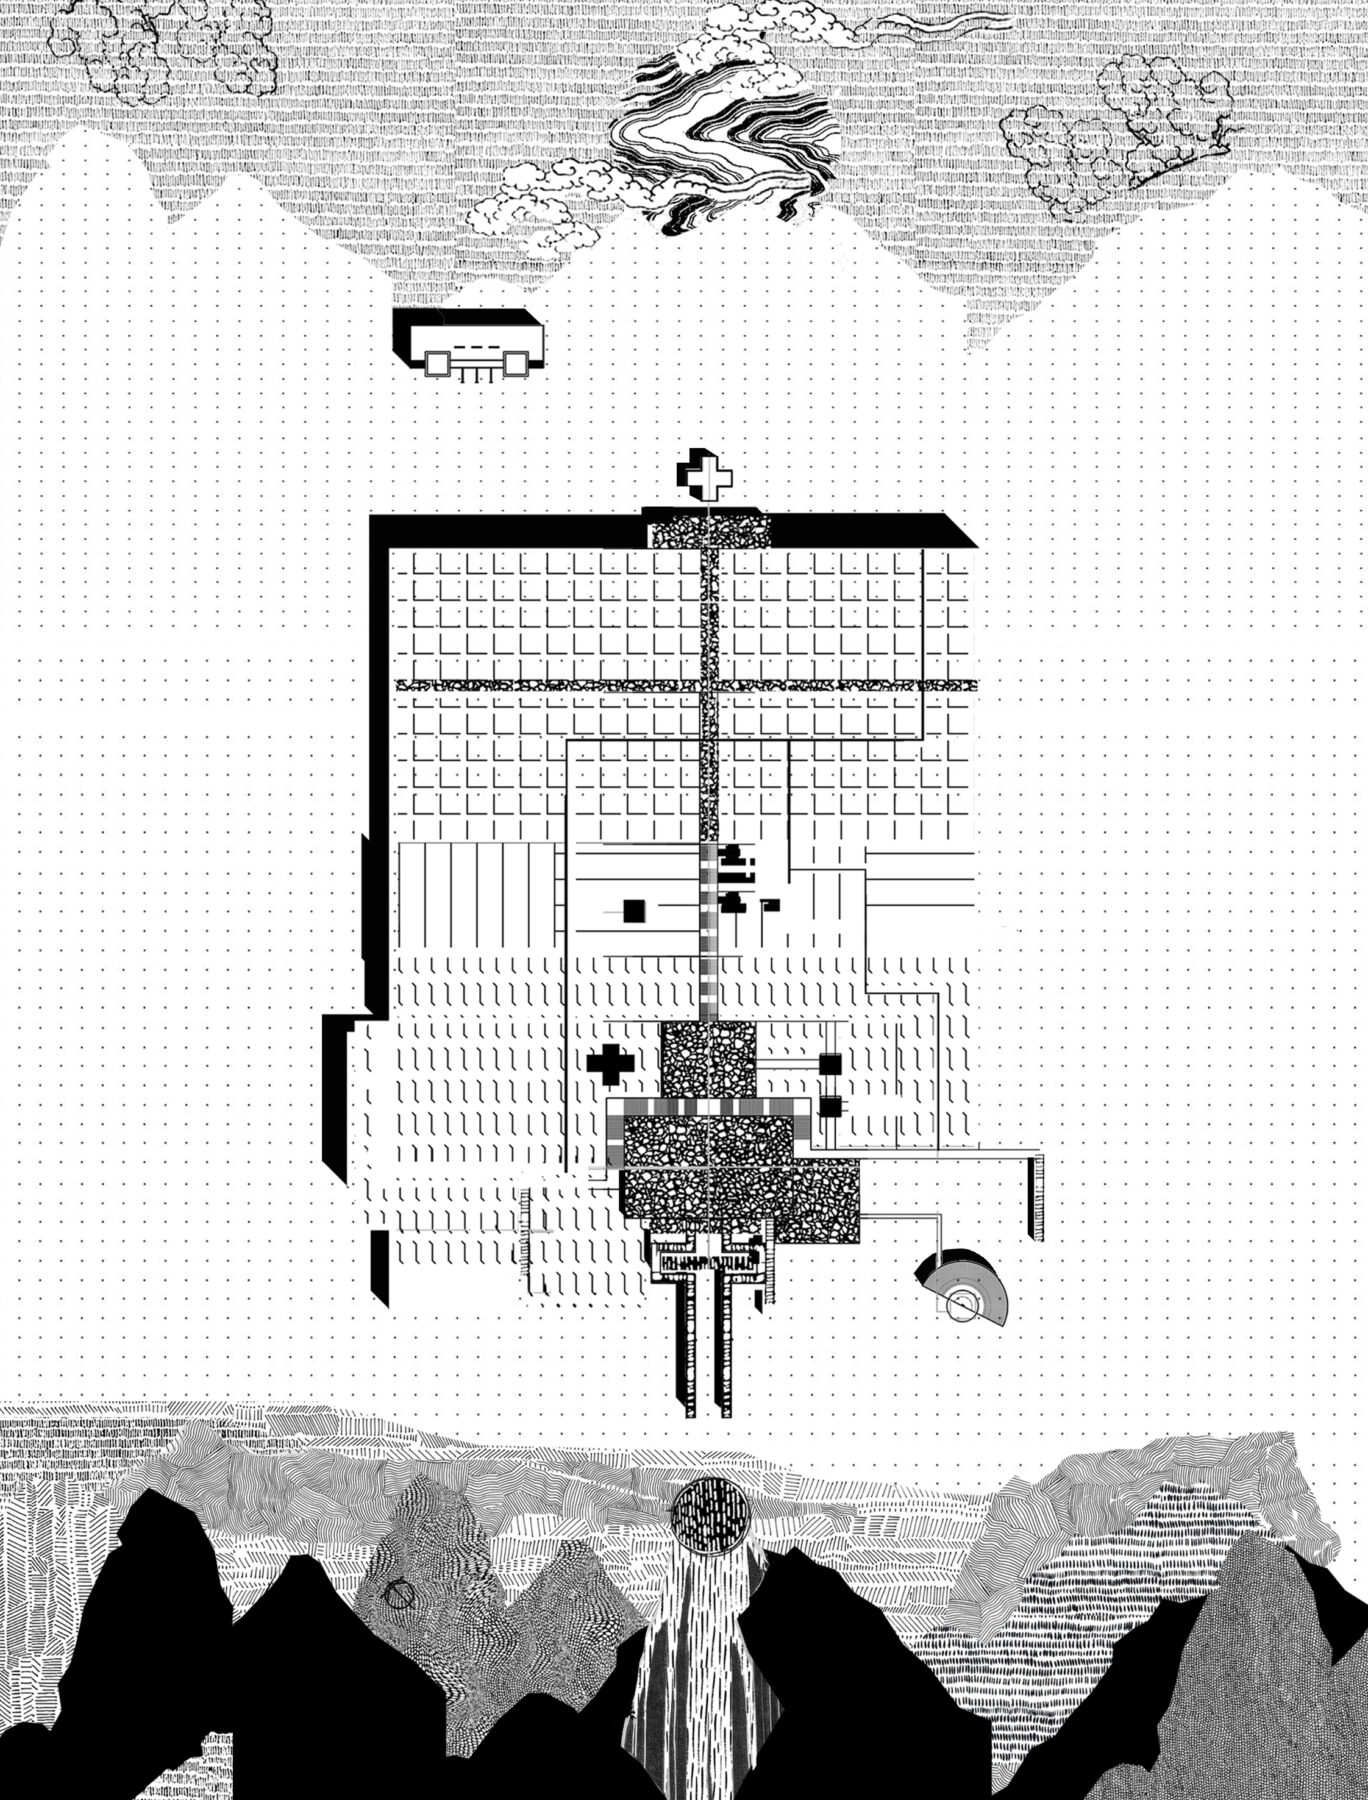 Archisearch Urania: threshold to a new urban condition or pre-modern nostalgia? | Diploma thesis by Afroditi Manolopoulou